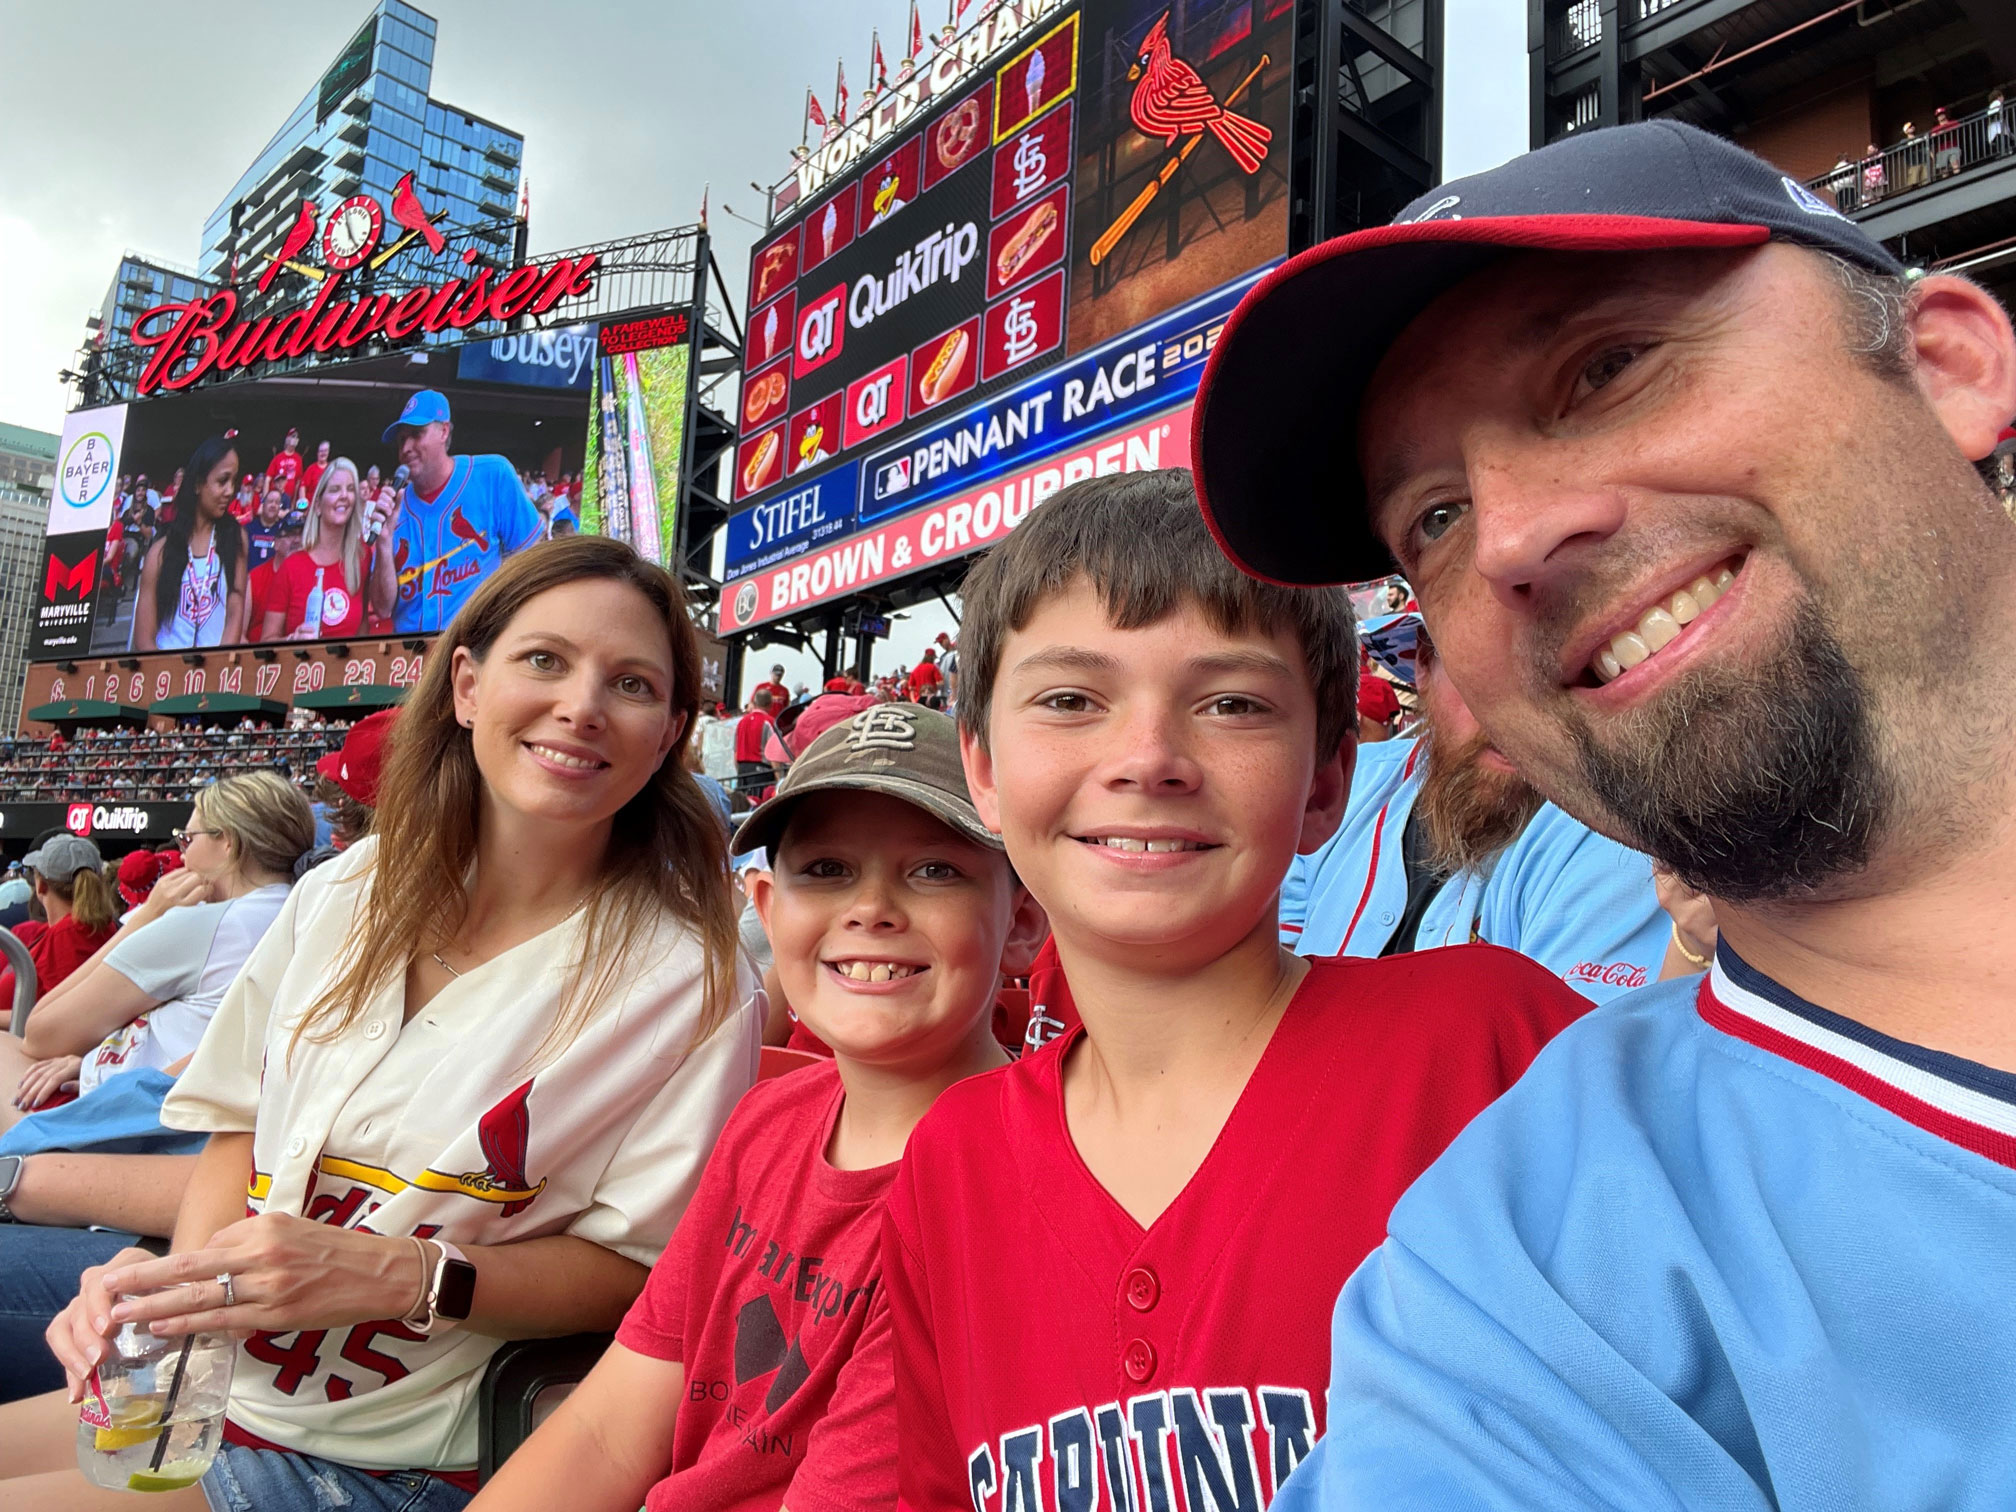 C.O. Scheffer and his family at a Cardinals game